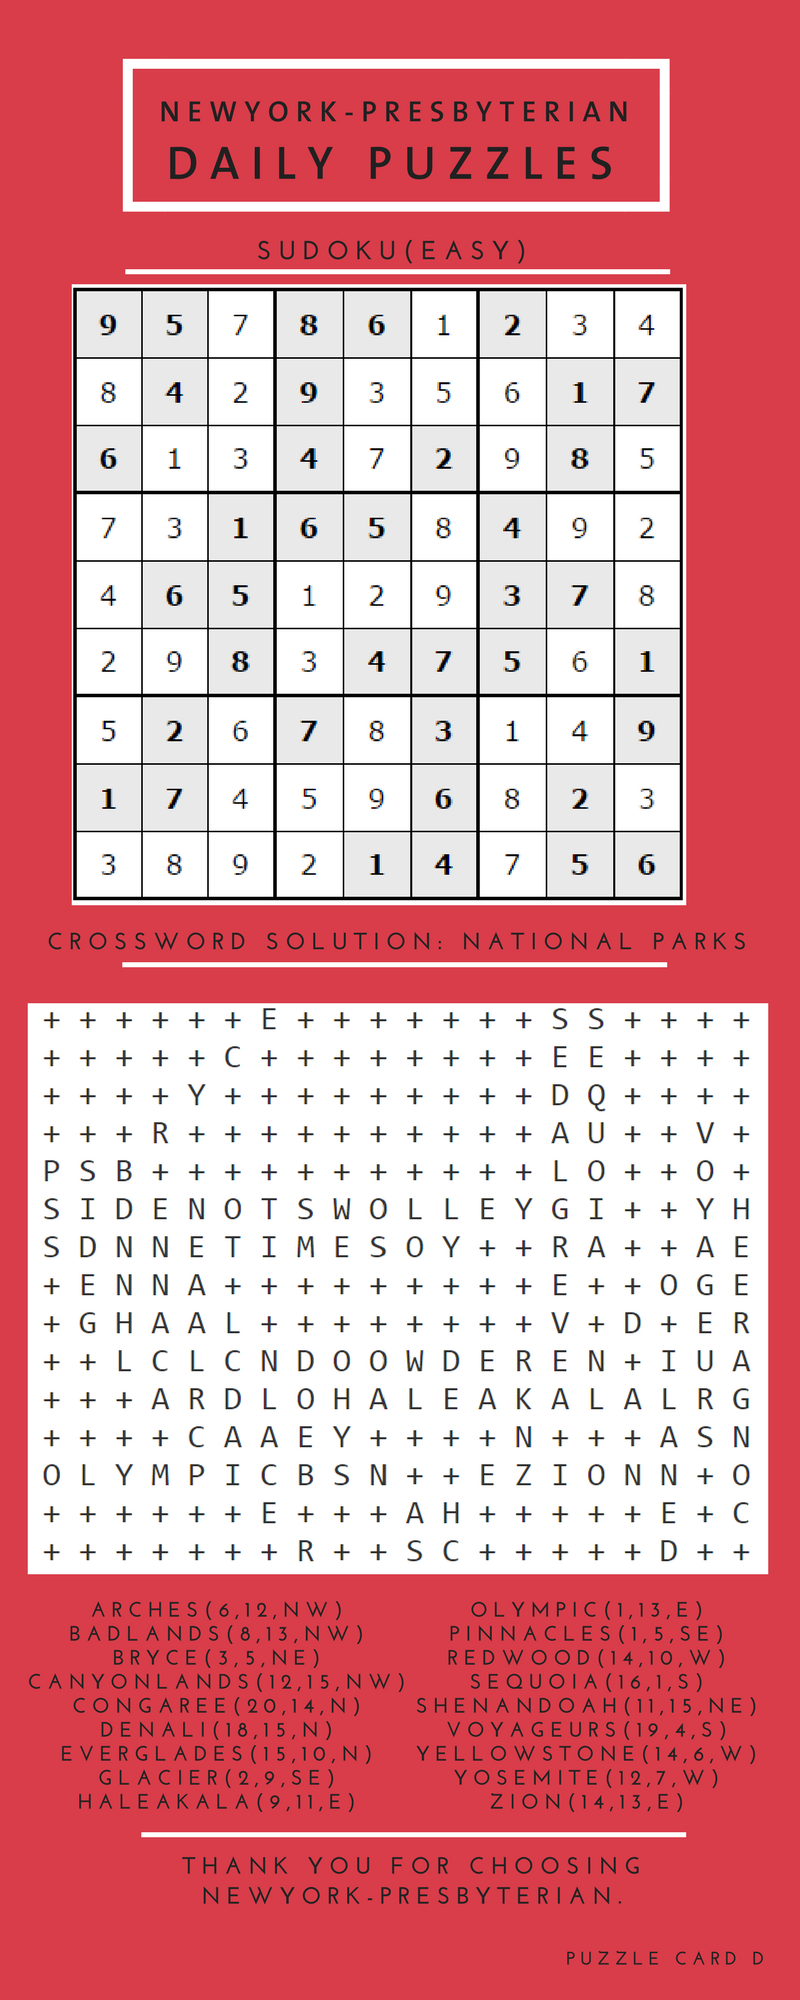 Puzzle-Card-D-Answer-Key